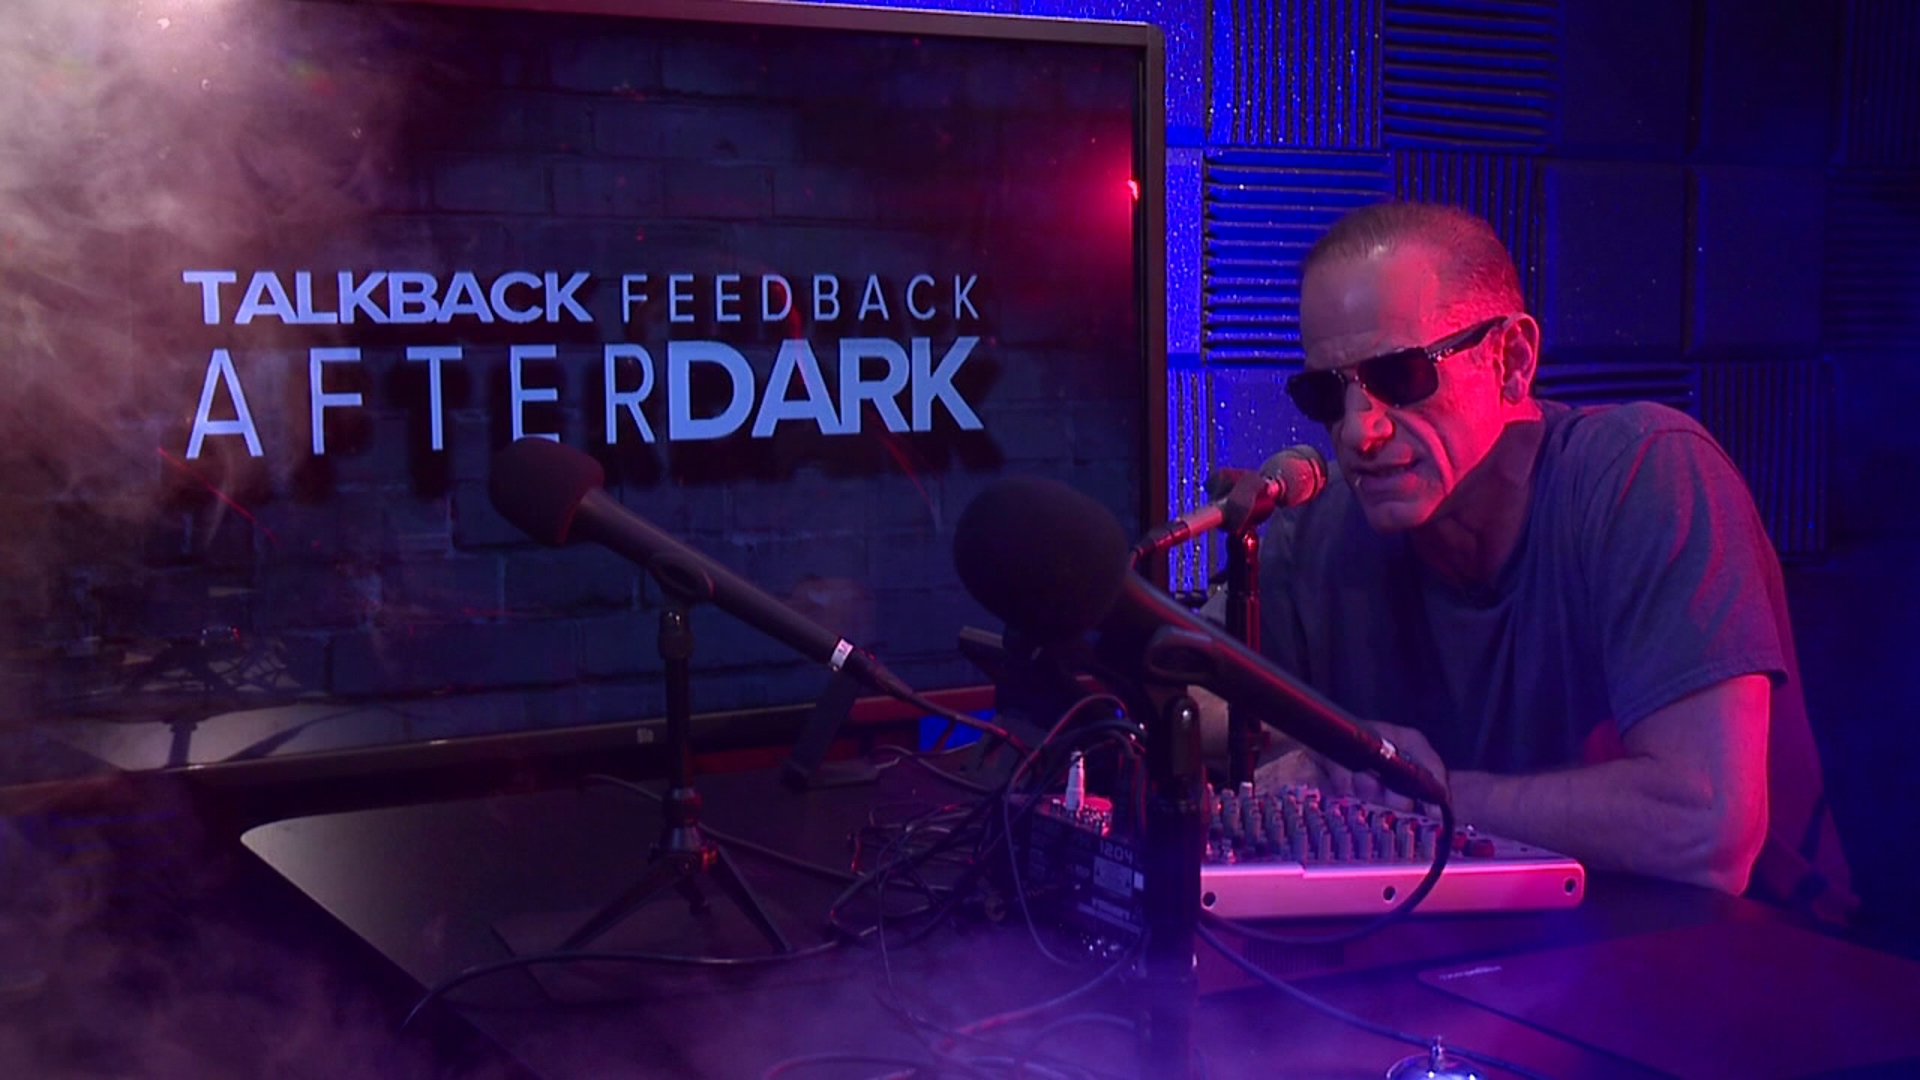 Scott takes on delicate issues in a special edition of Talkback Feedback After Dark.